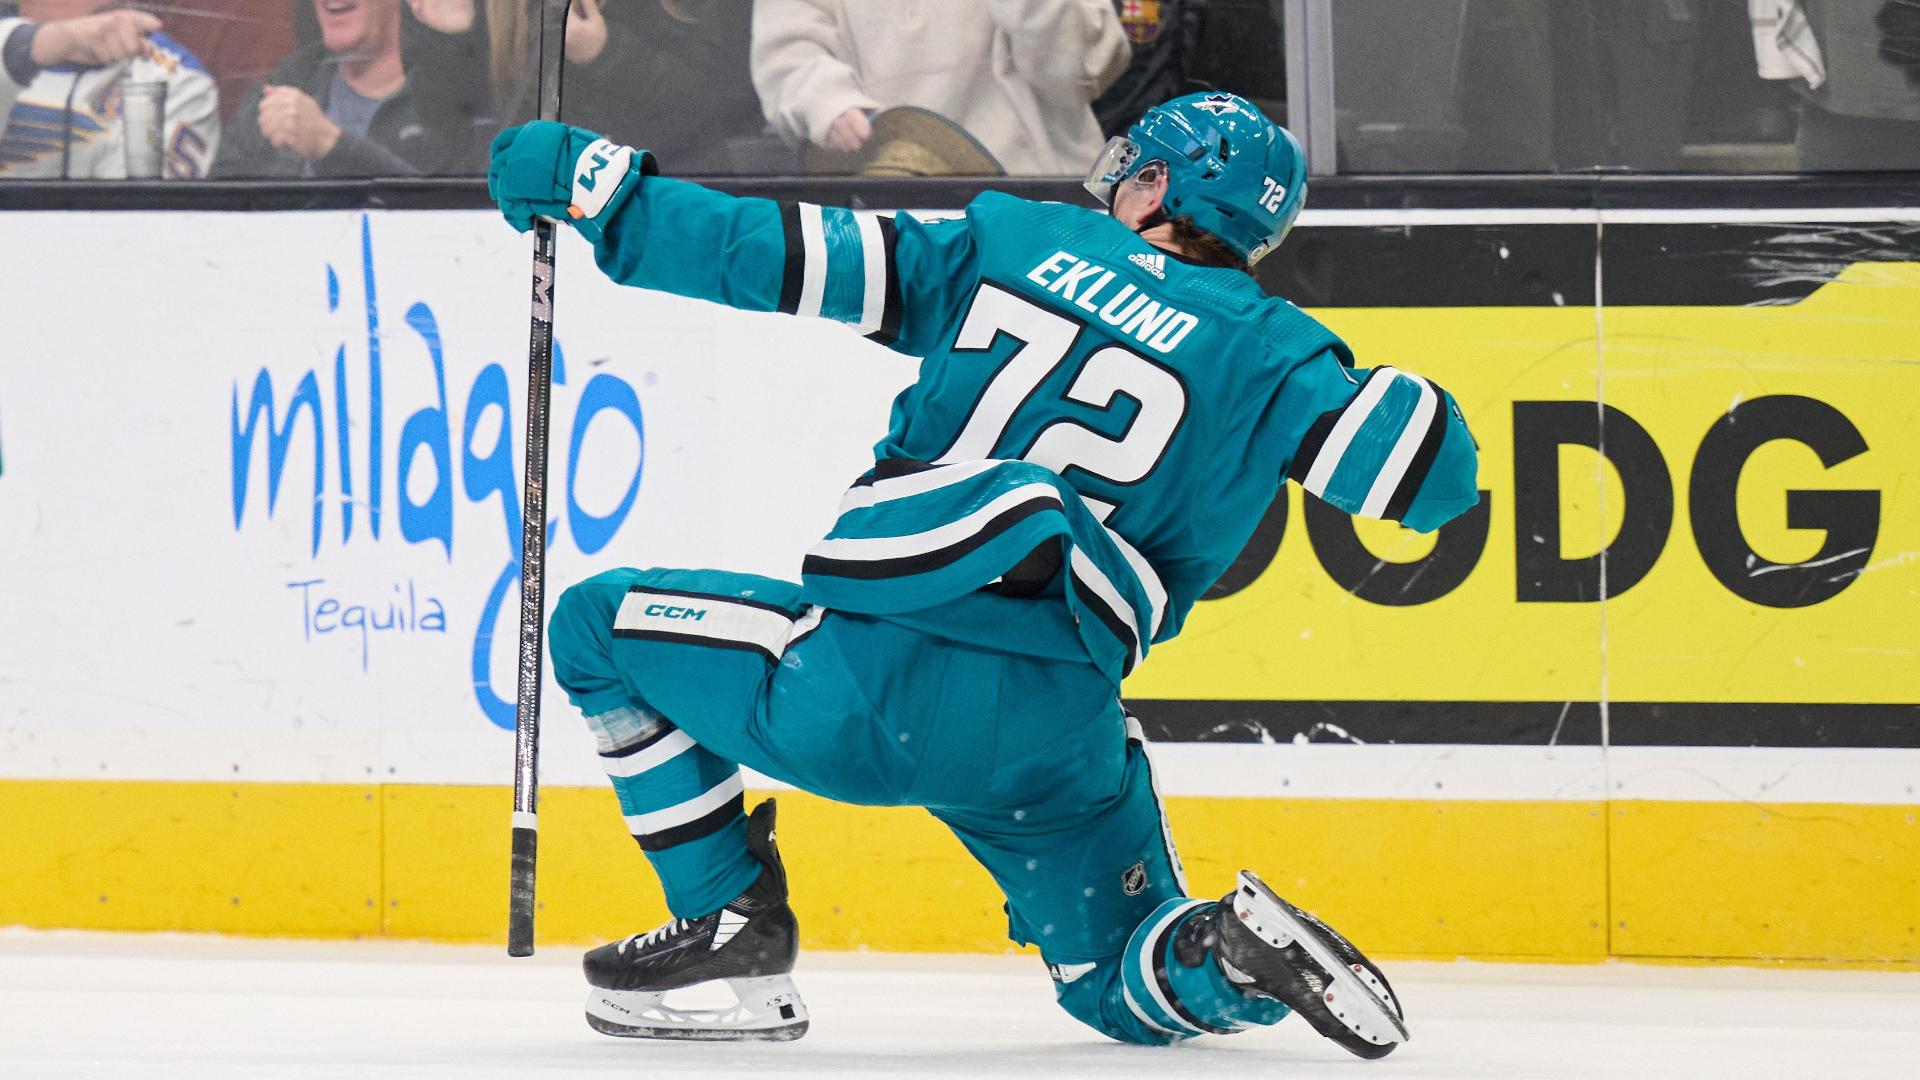 William Eklund completes hat trick to win it for Sharks in OT